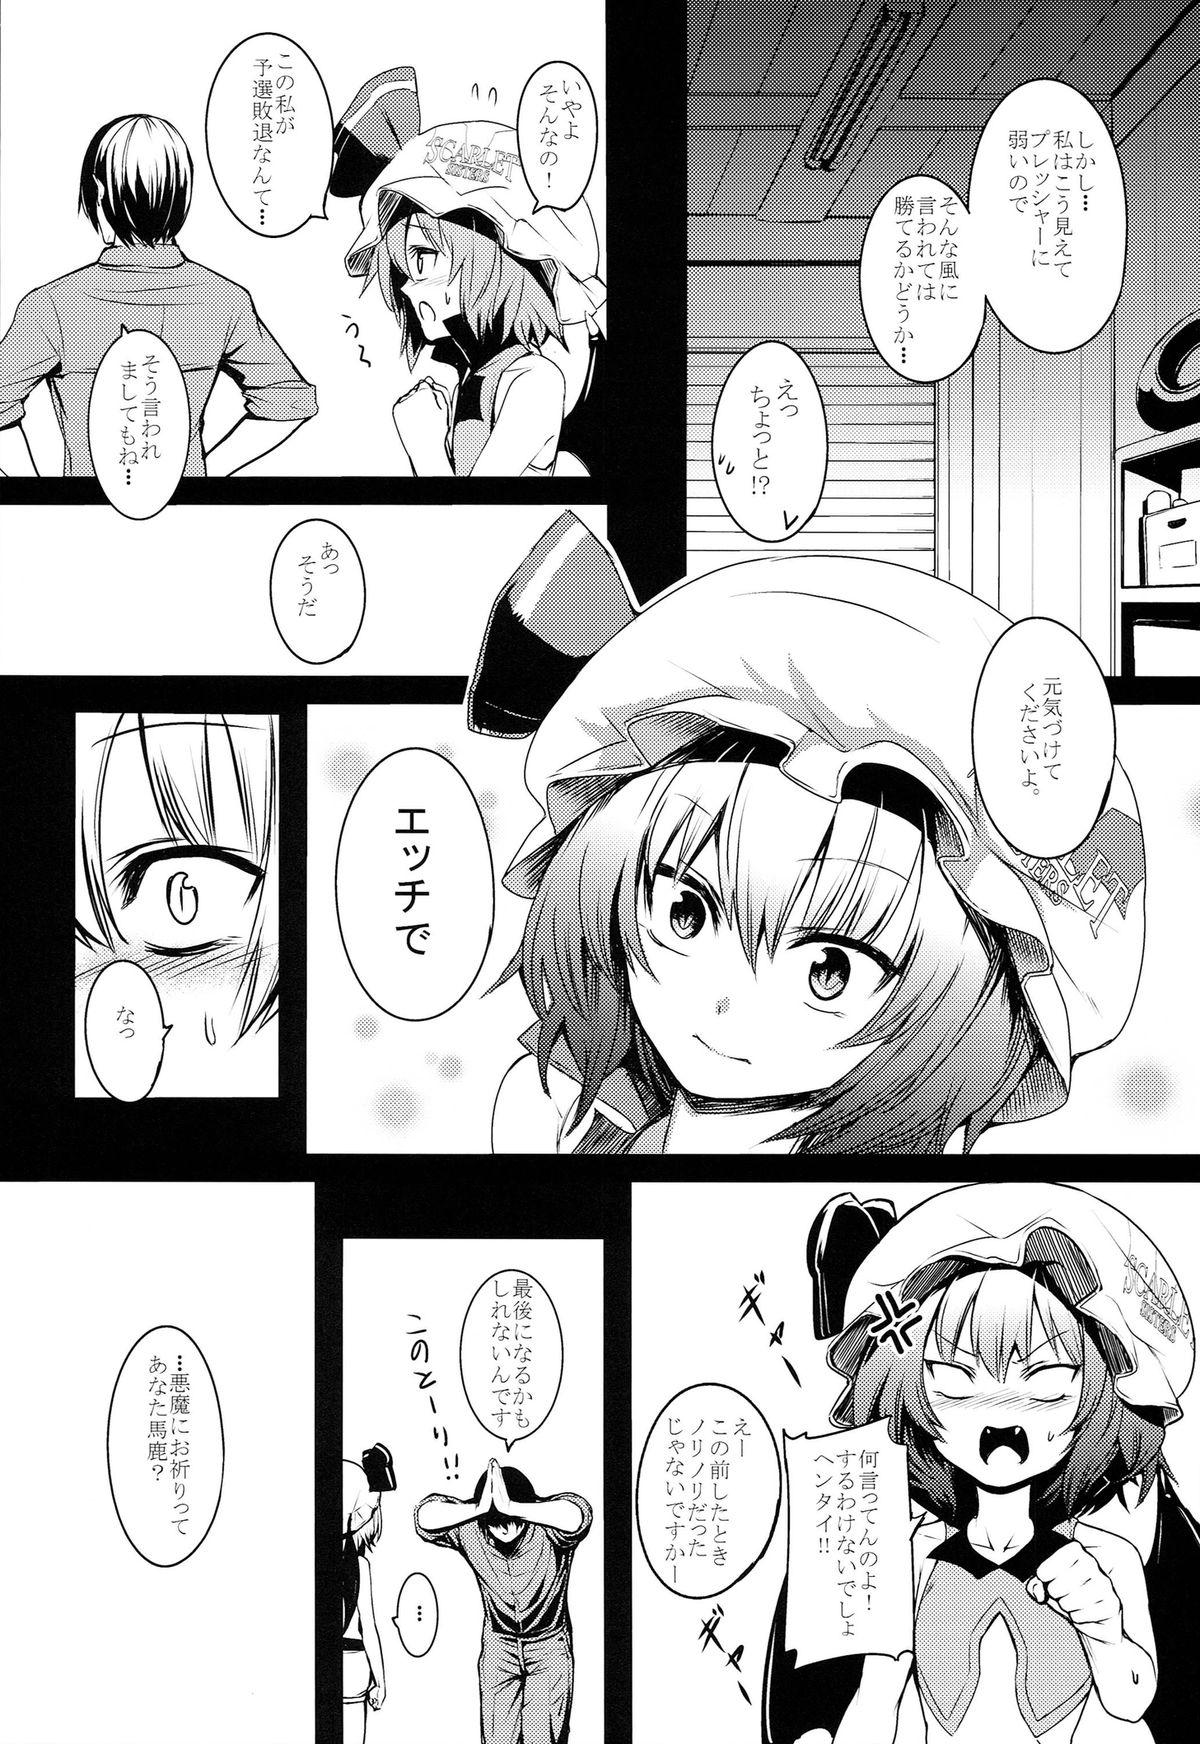 Naturaltits TOUHOU RACE QUEENS COLLABO CLUB - Touhou project Butt Fuck - Page 5